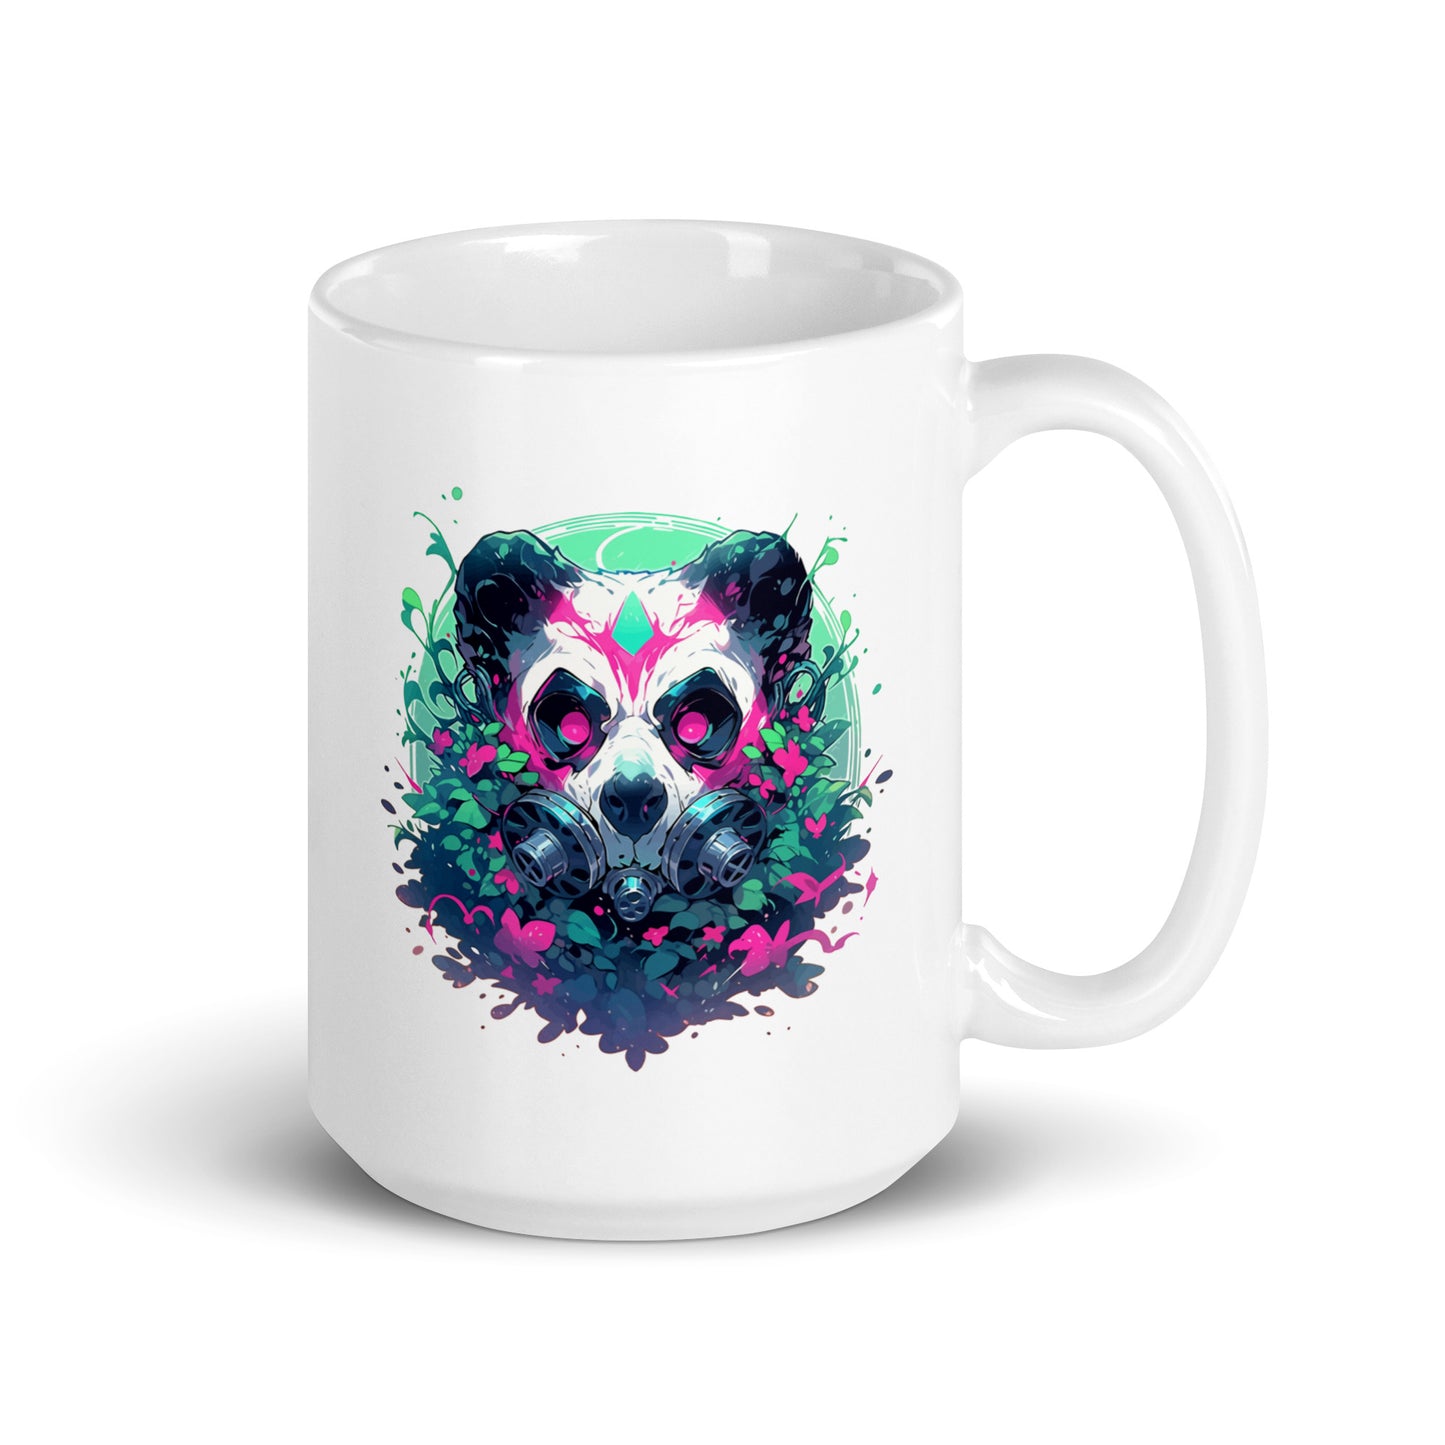 Cool toxic panda, Post-apocalyptic jungle, Wild animal with pink eyes, Bamboo bear in gas mask, Black and white bear - White glossy mug